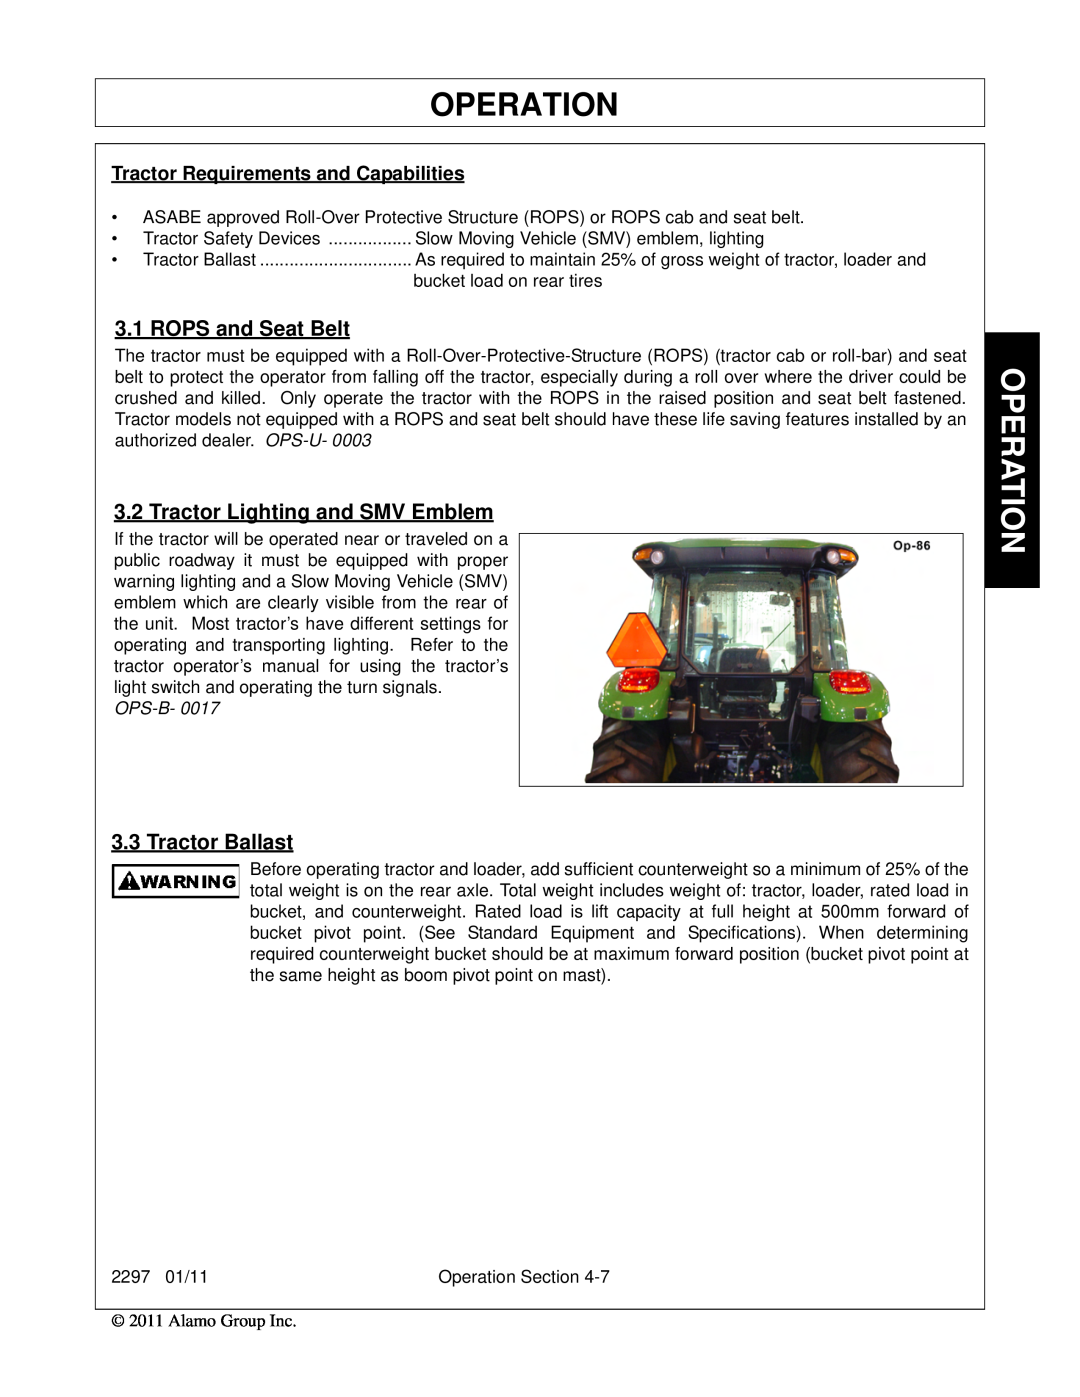 Bush Hog 2297 manual Operation, ROPS and Seat Belt, Tractor Lighting and SMV Emblem, Tractor Ballast, Ops-B 